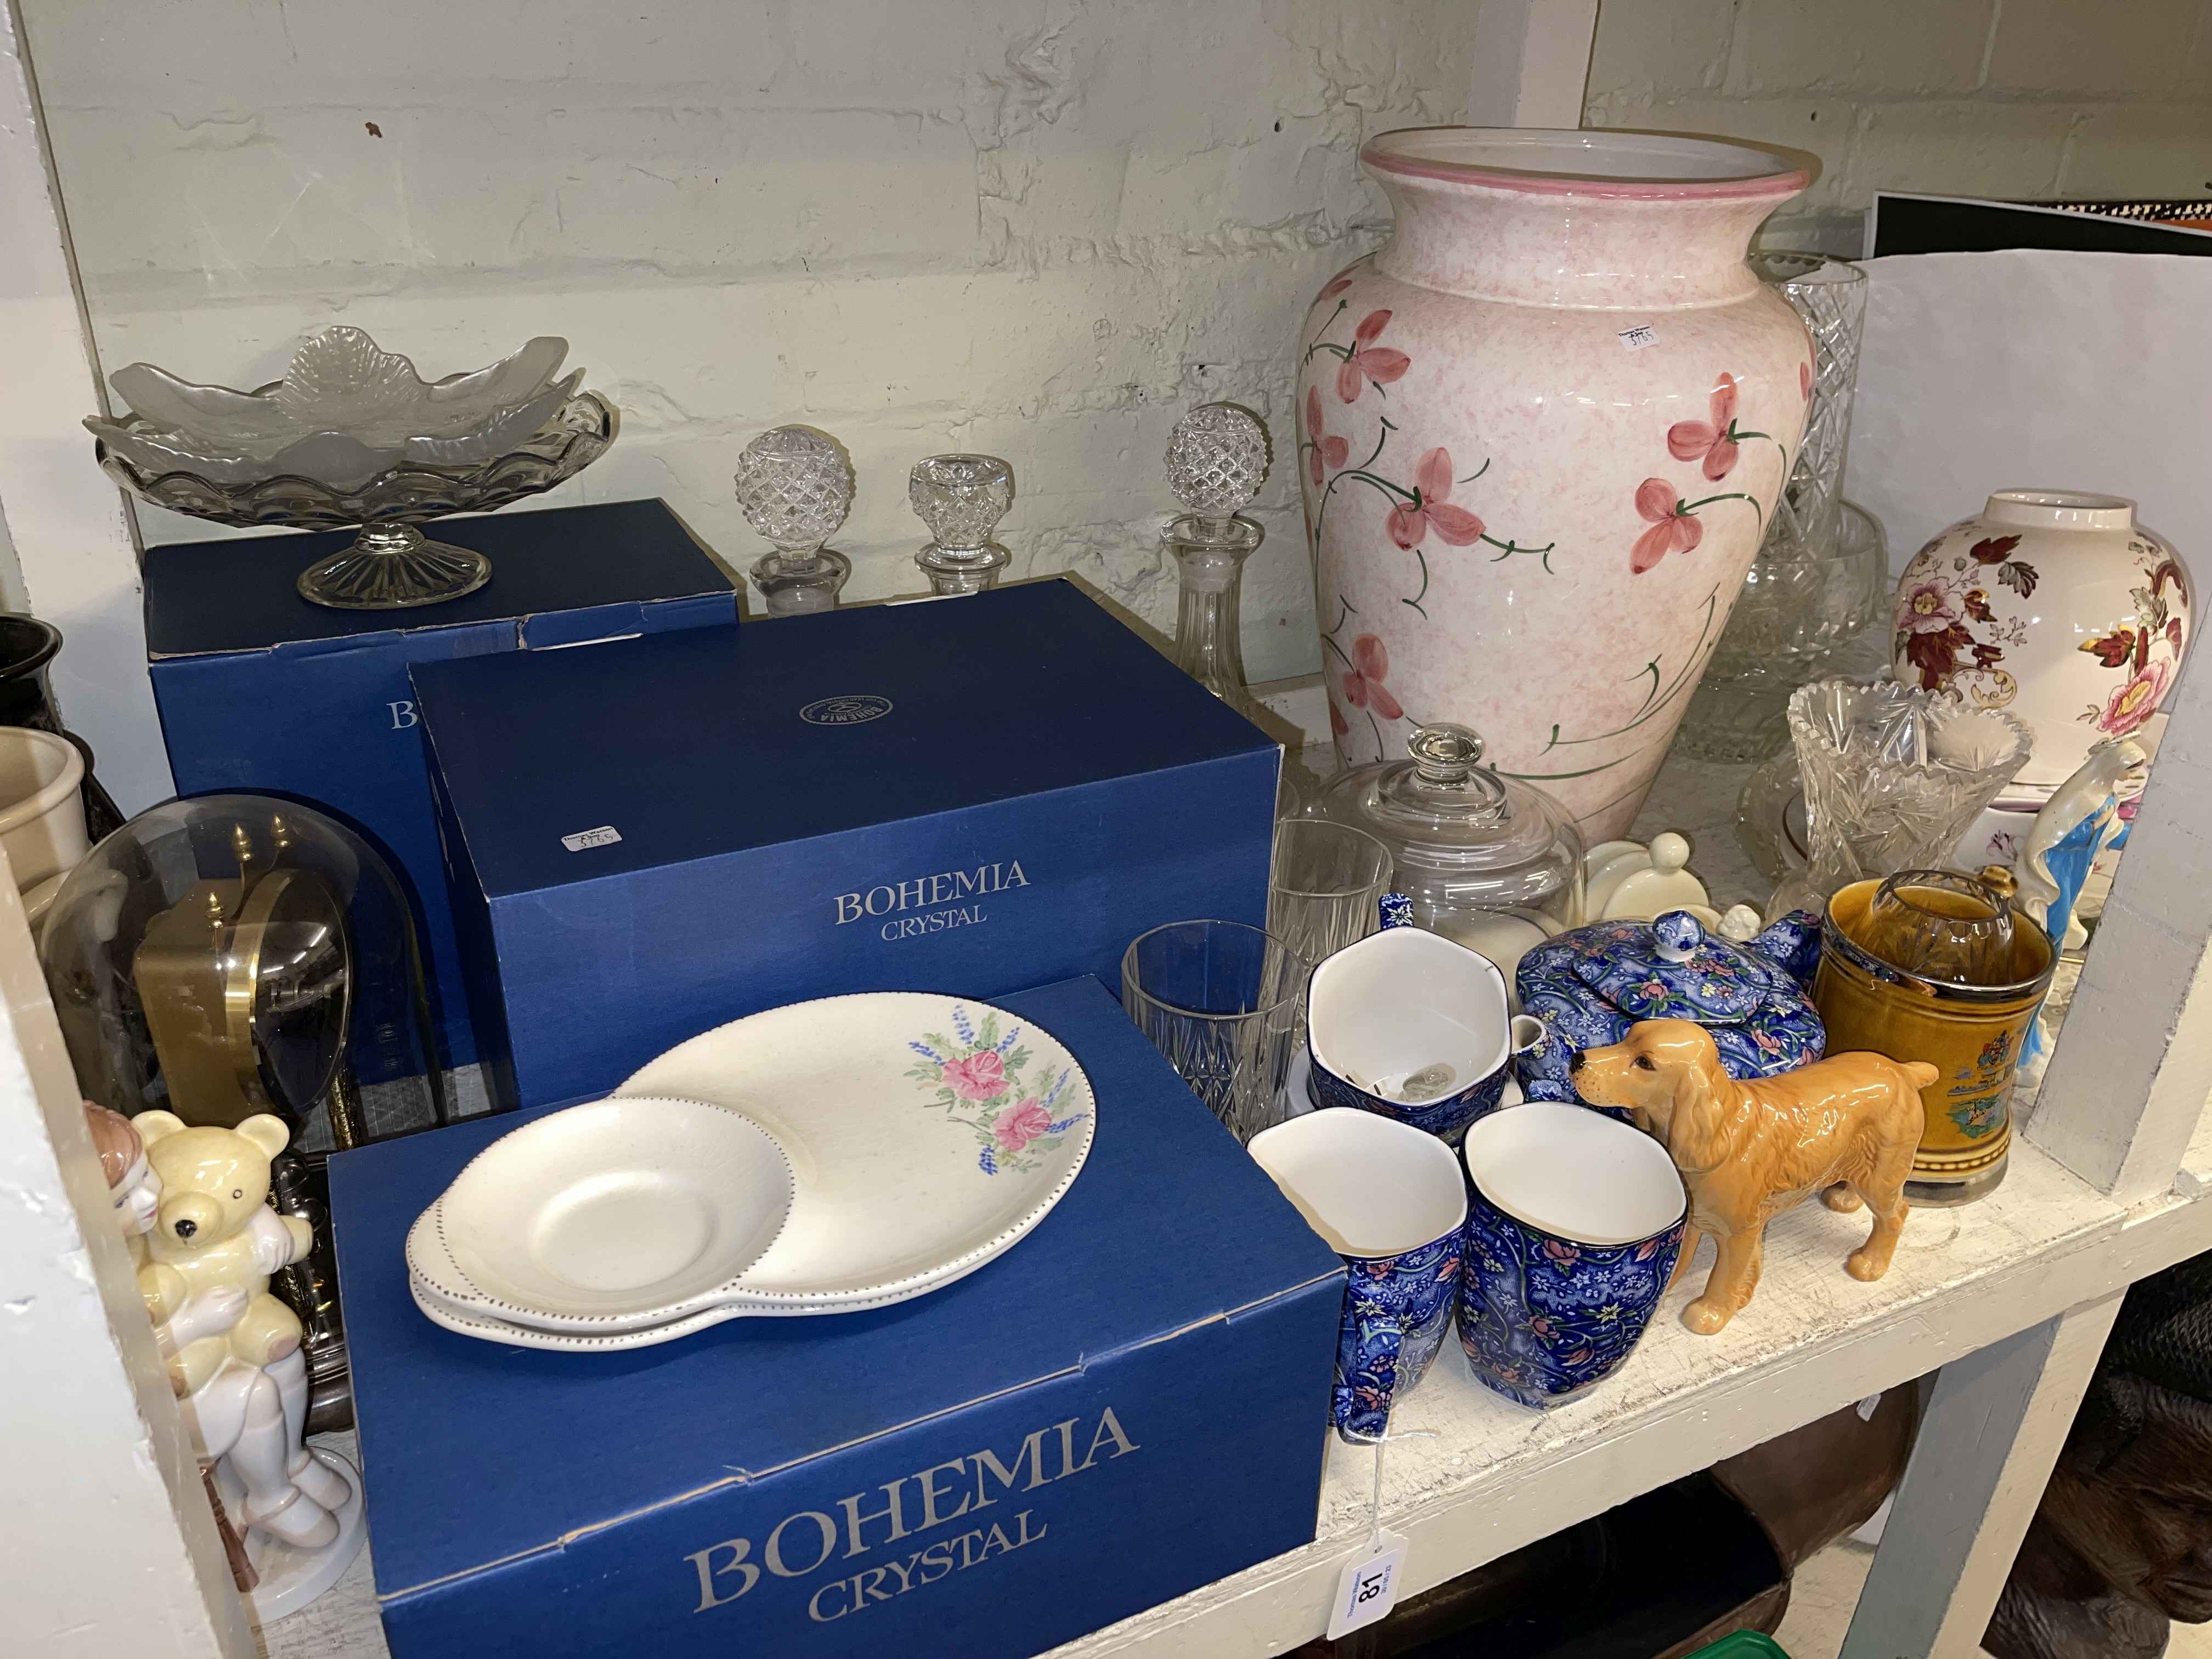 Collection of Bohemia crystal, Ringtons, metalwares, decanters, prints, etc. - Image 3 of 3